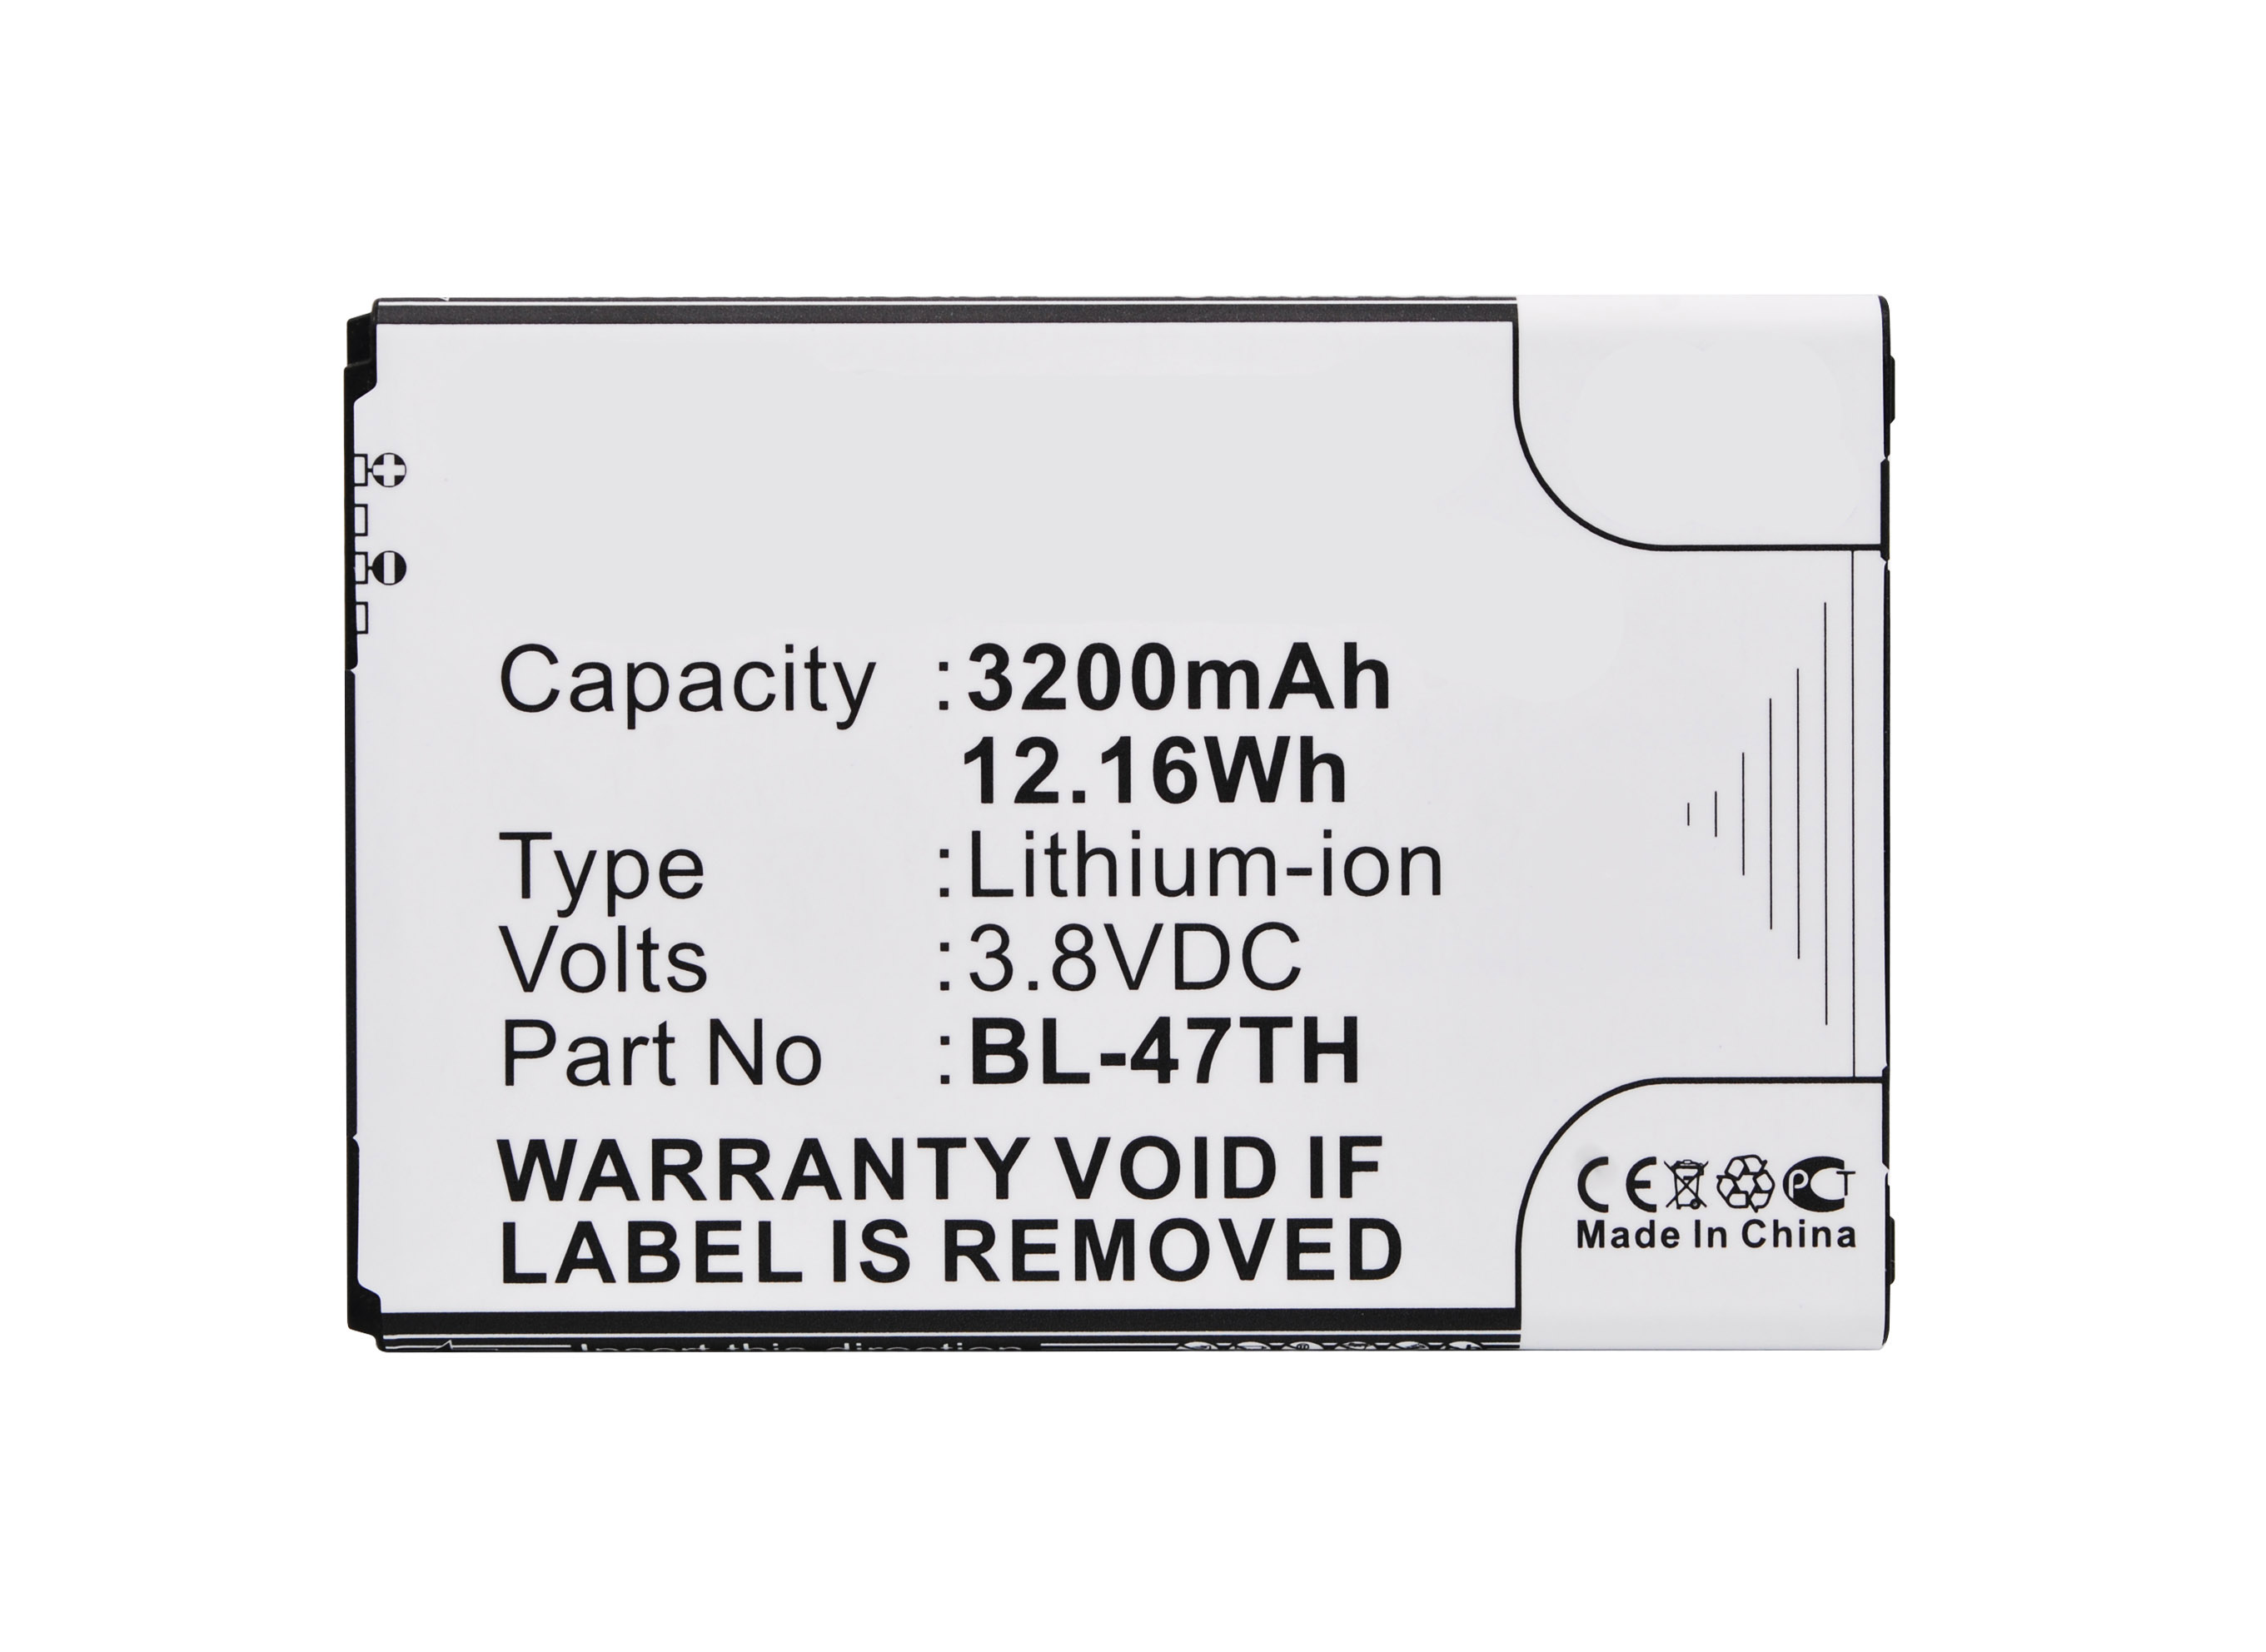 Synergy Digital Cell Phone Battery, Compatiable with LG BL-47TH, EAC62298601 Cell Phone Battery (3.8V, Li-ion, 3200mAh)